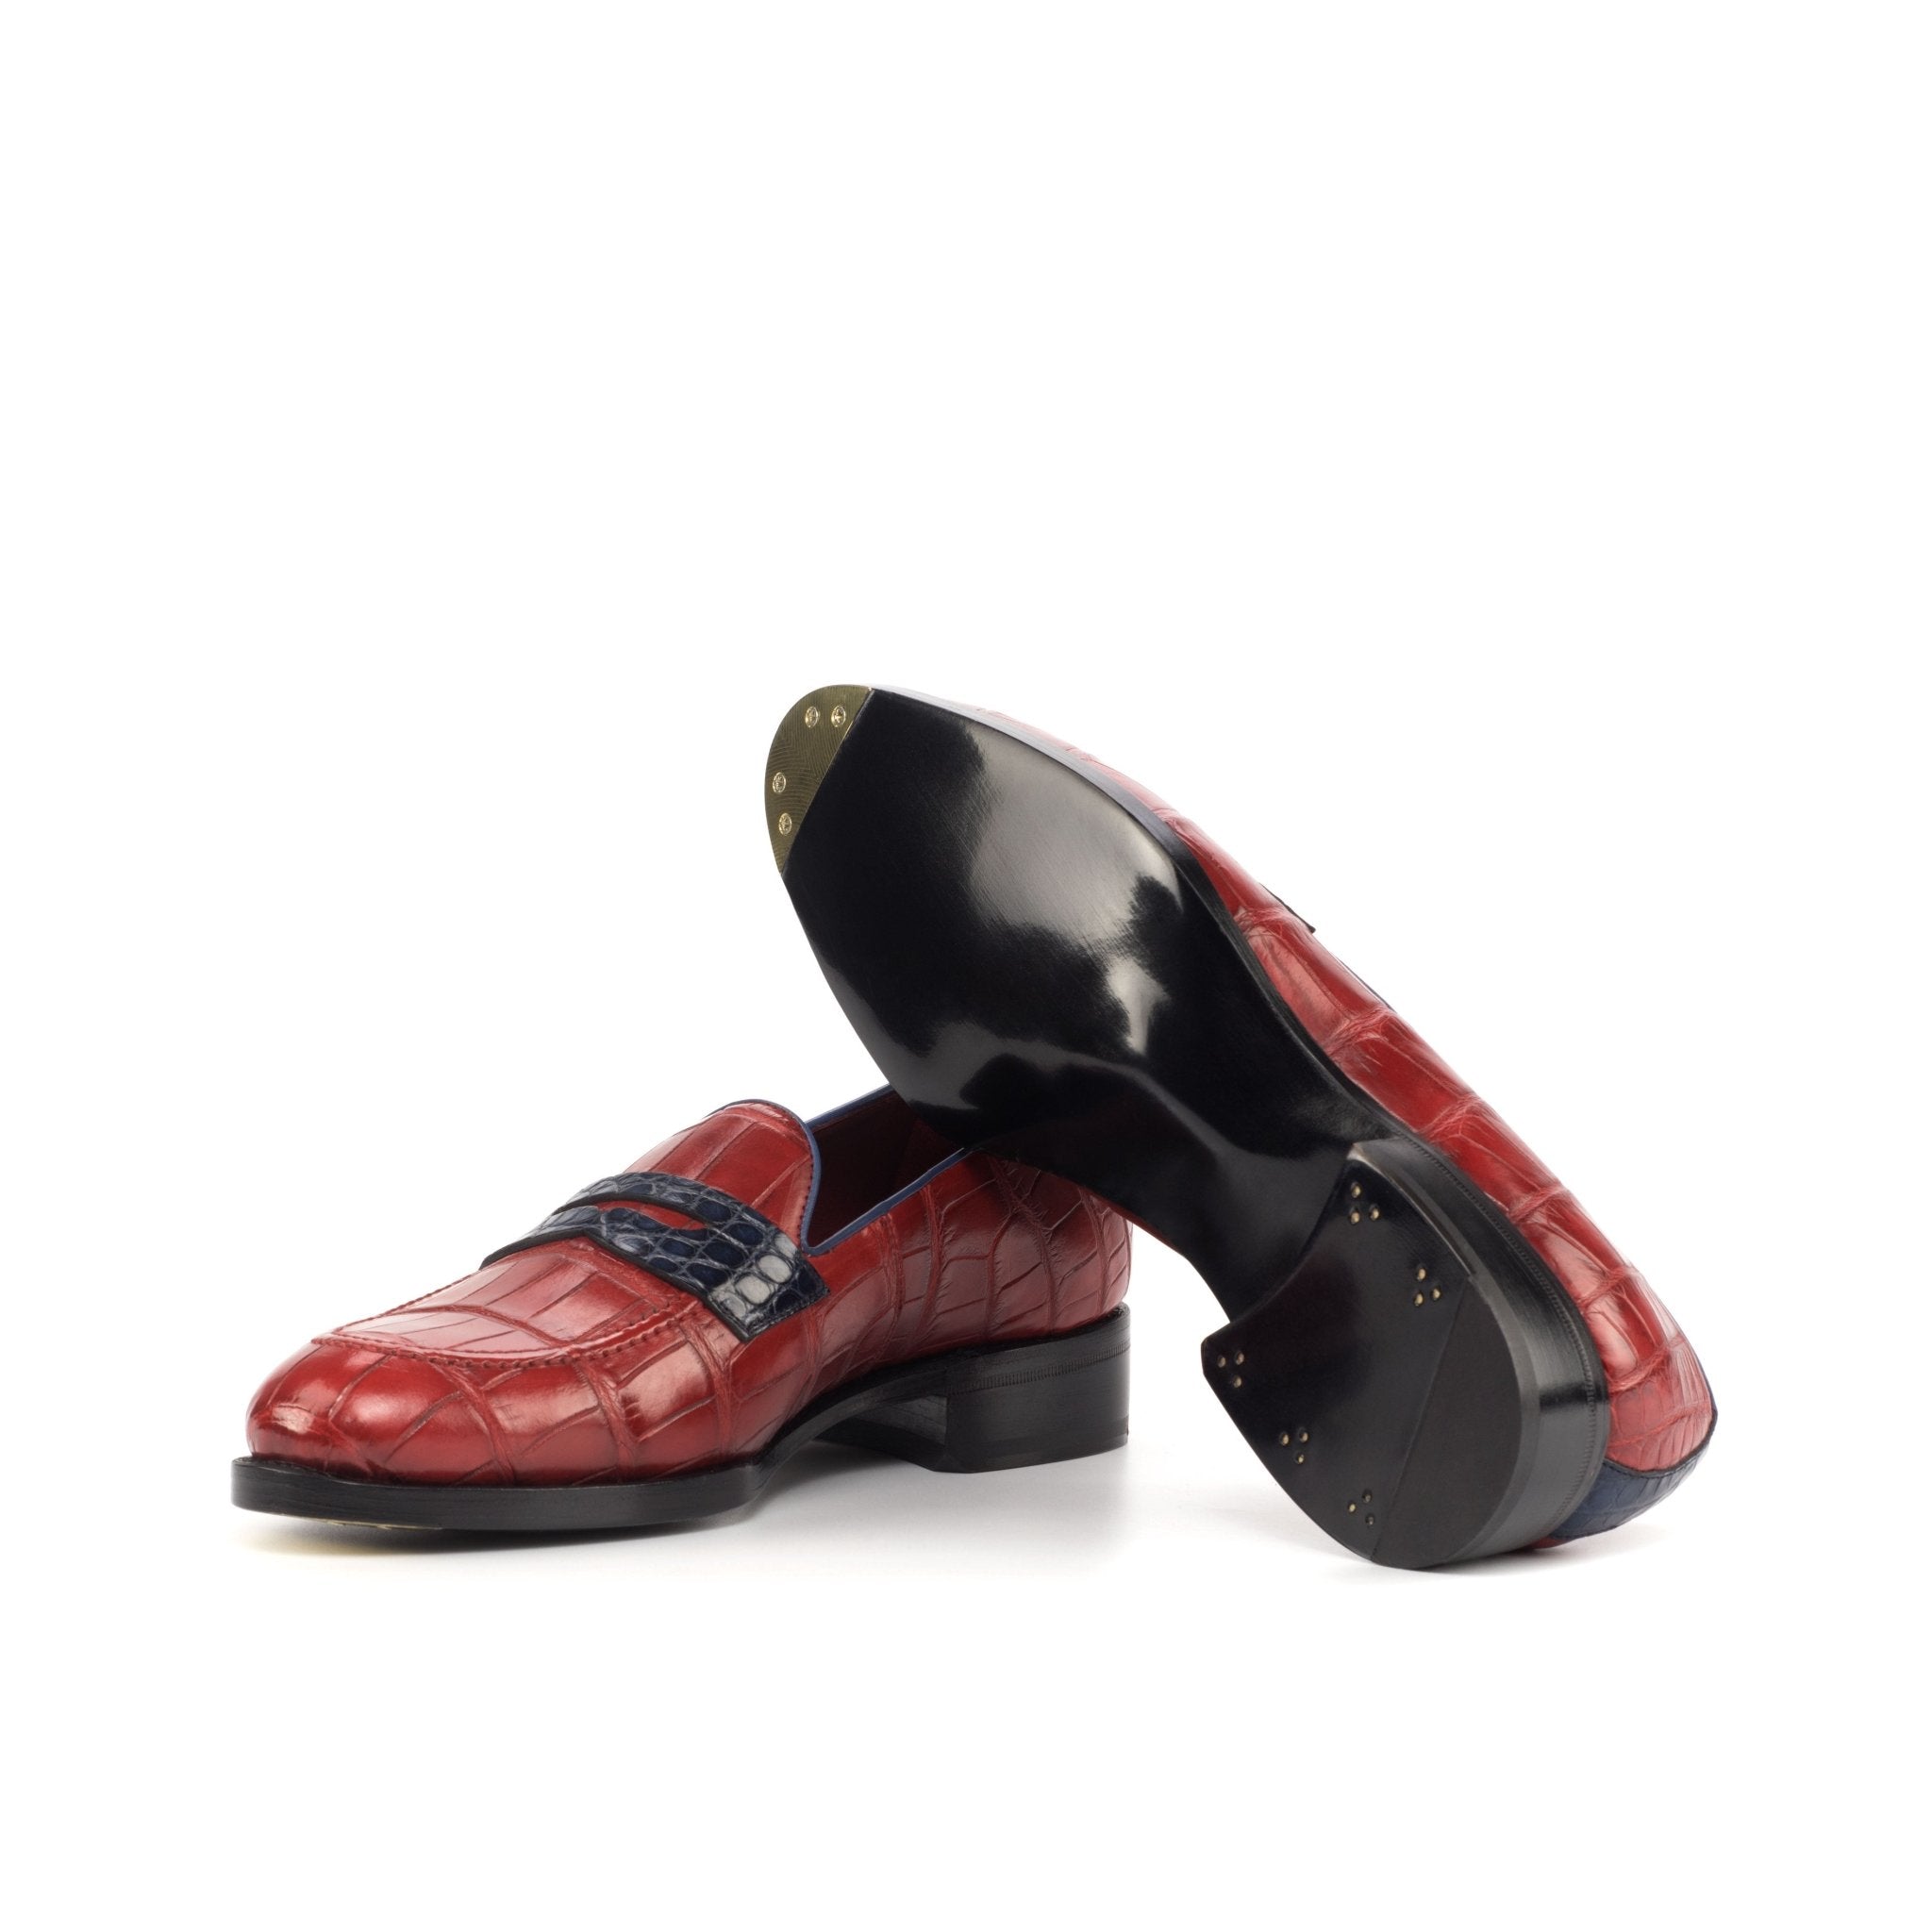 Men's Red and Navy Blue Alligator Loafers with High Heel and Toe Taps - Maison de Kingsley Couture Harmonie et Fureur Spain